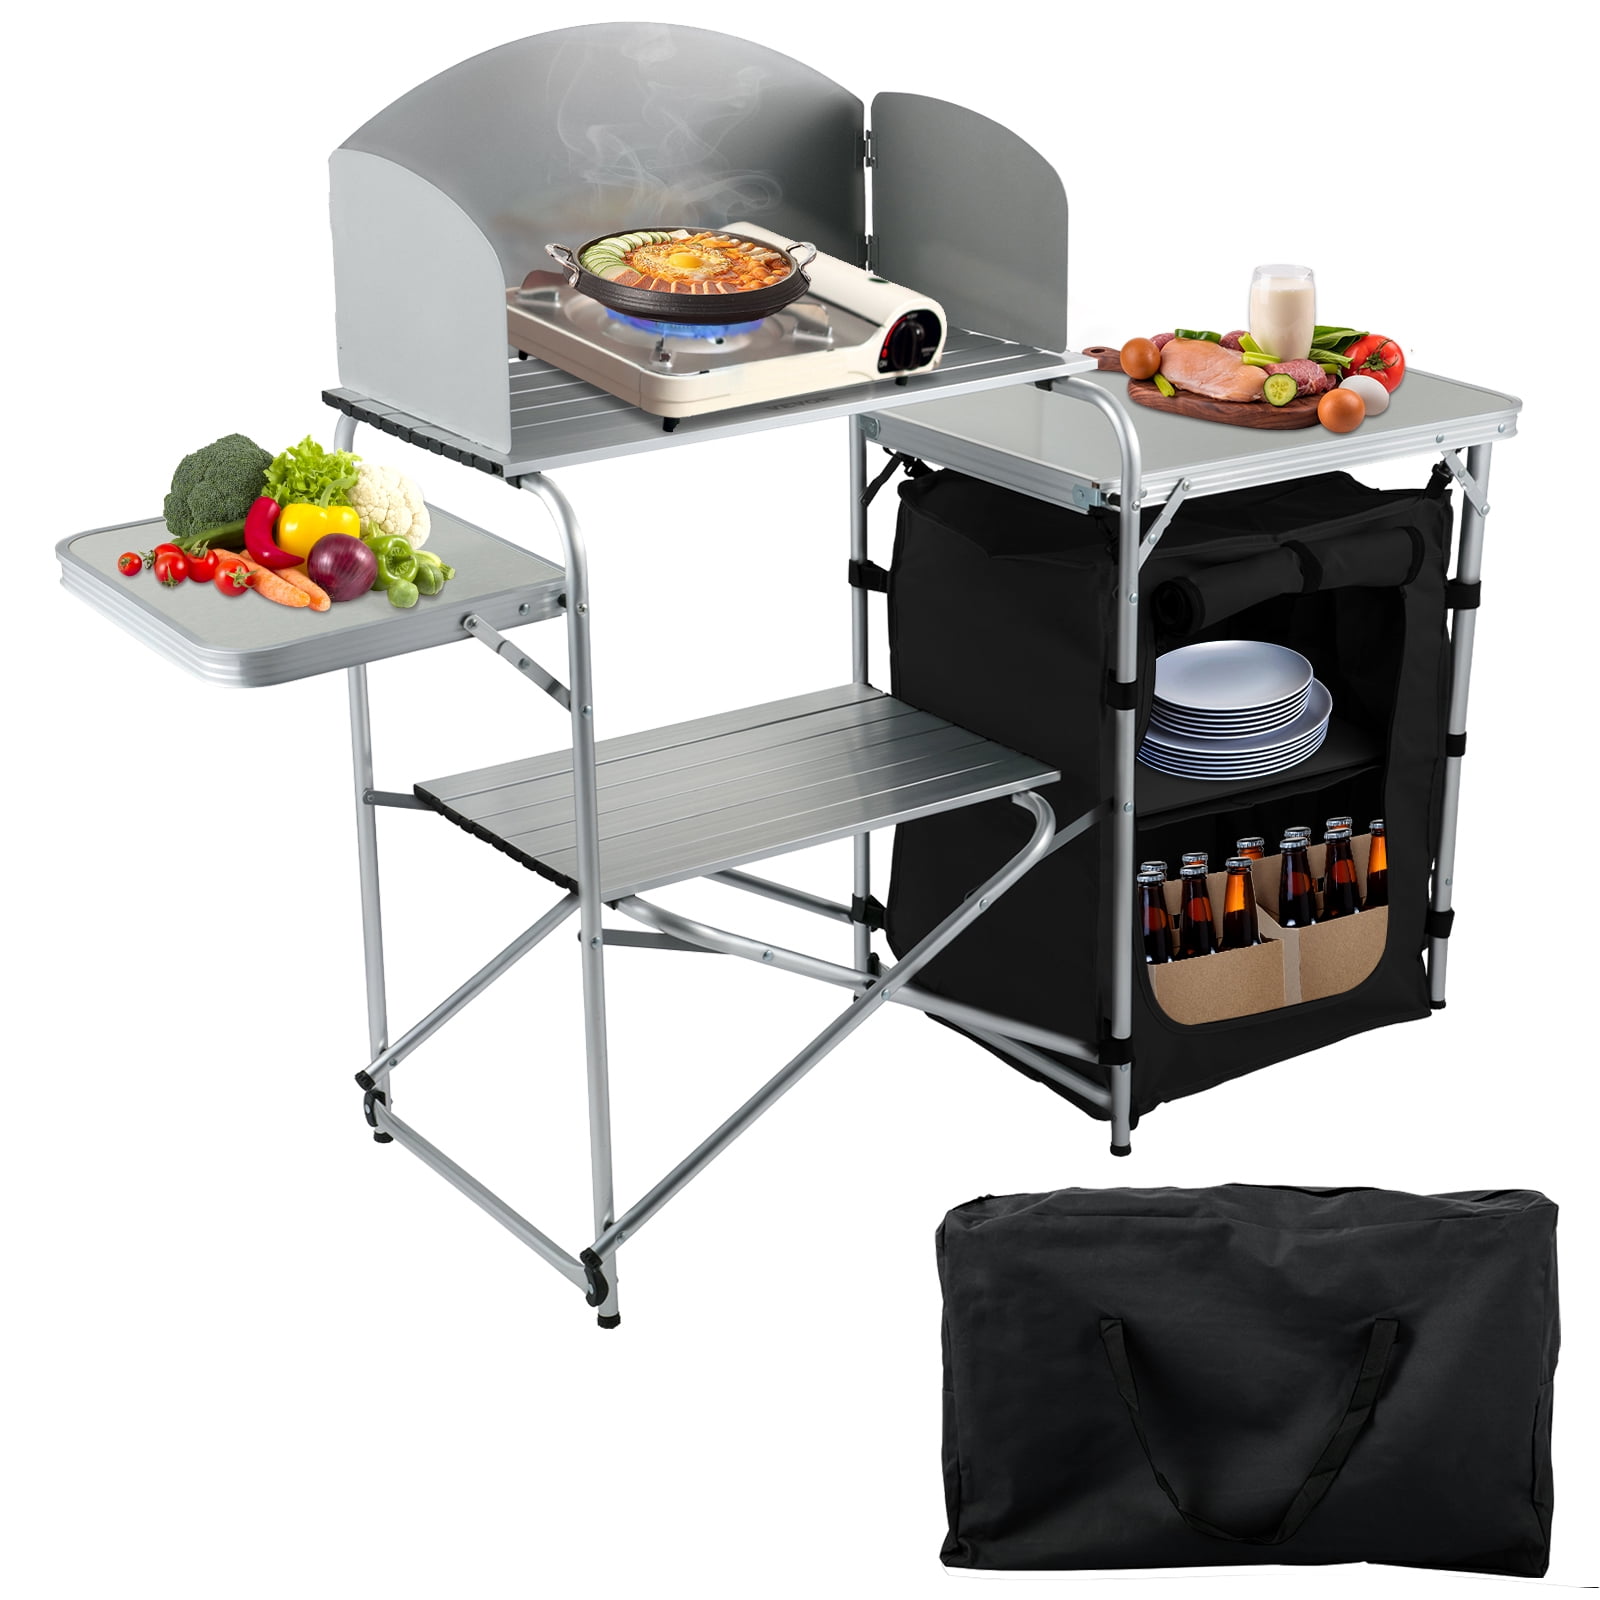 VEVOR Camping Kitchen Station, Aluminum Portable Folding Camp Cook Table  with Windshield, Storage Organizer and 4 Adjustable Feet, Quick  Installation